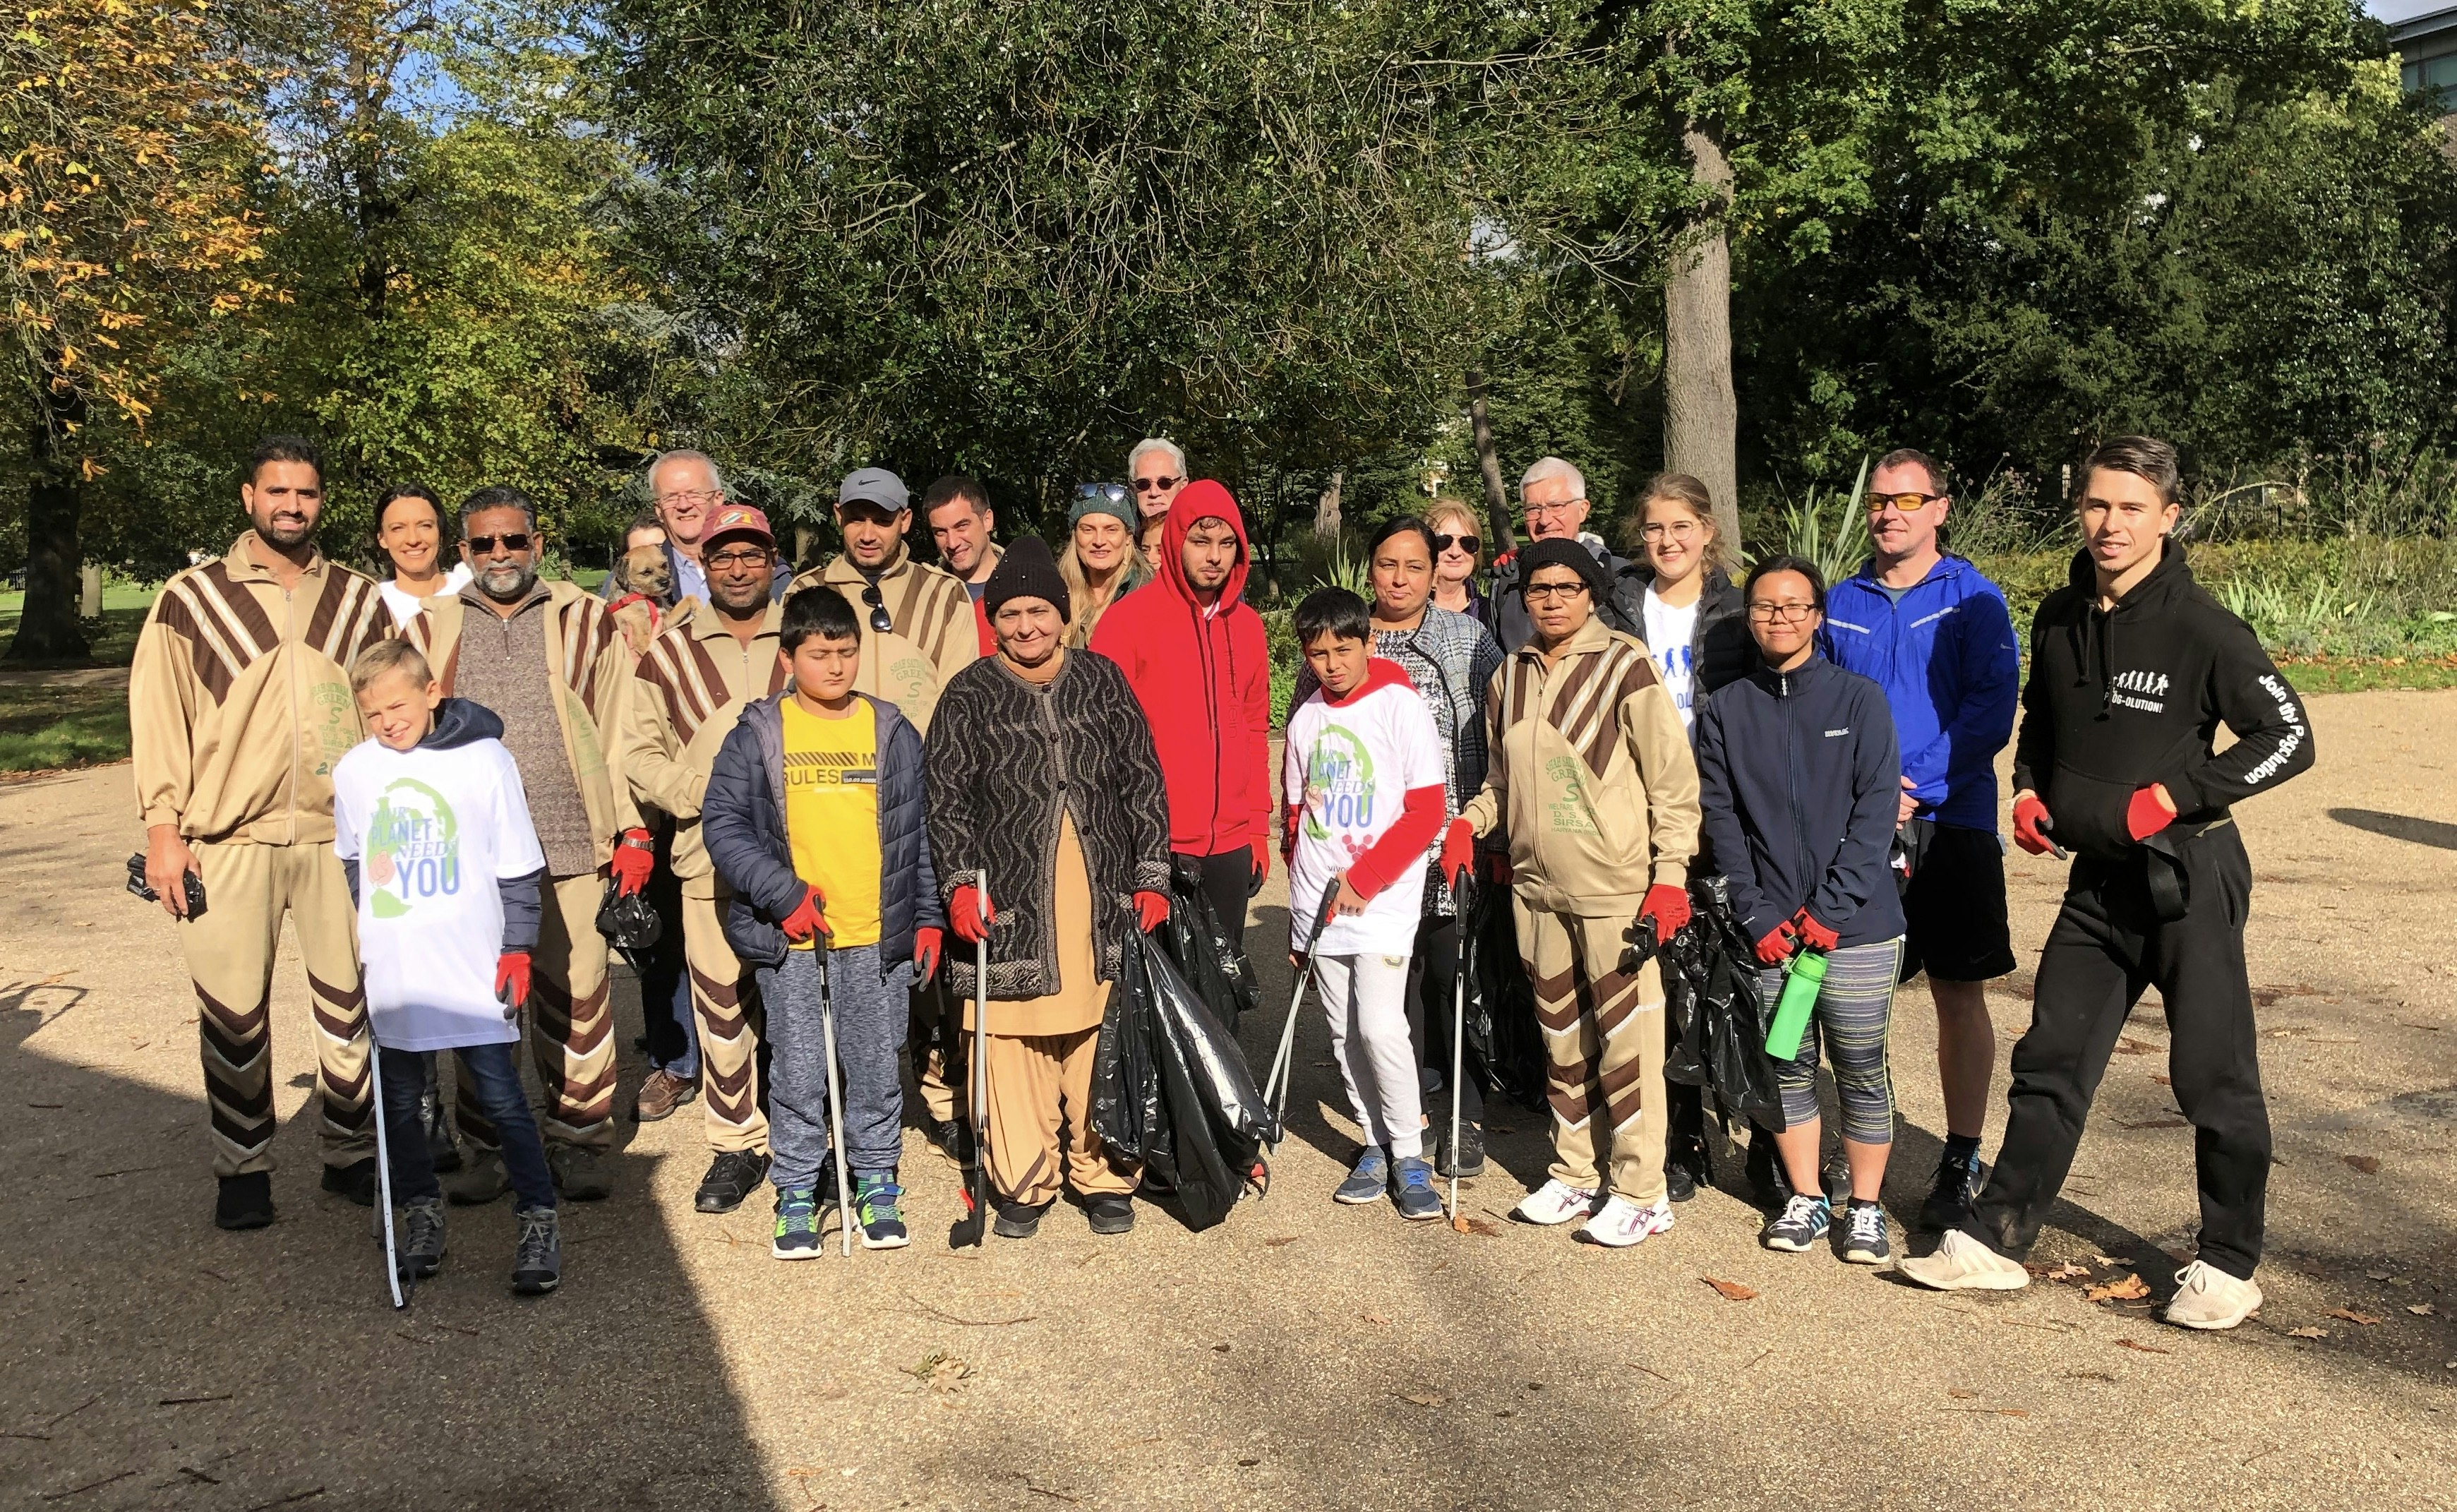 The group of people who took part in the plogging class stand together for a photograph. Some hold black bags and litter pickers.